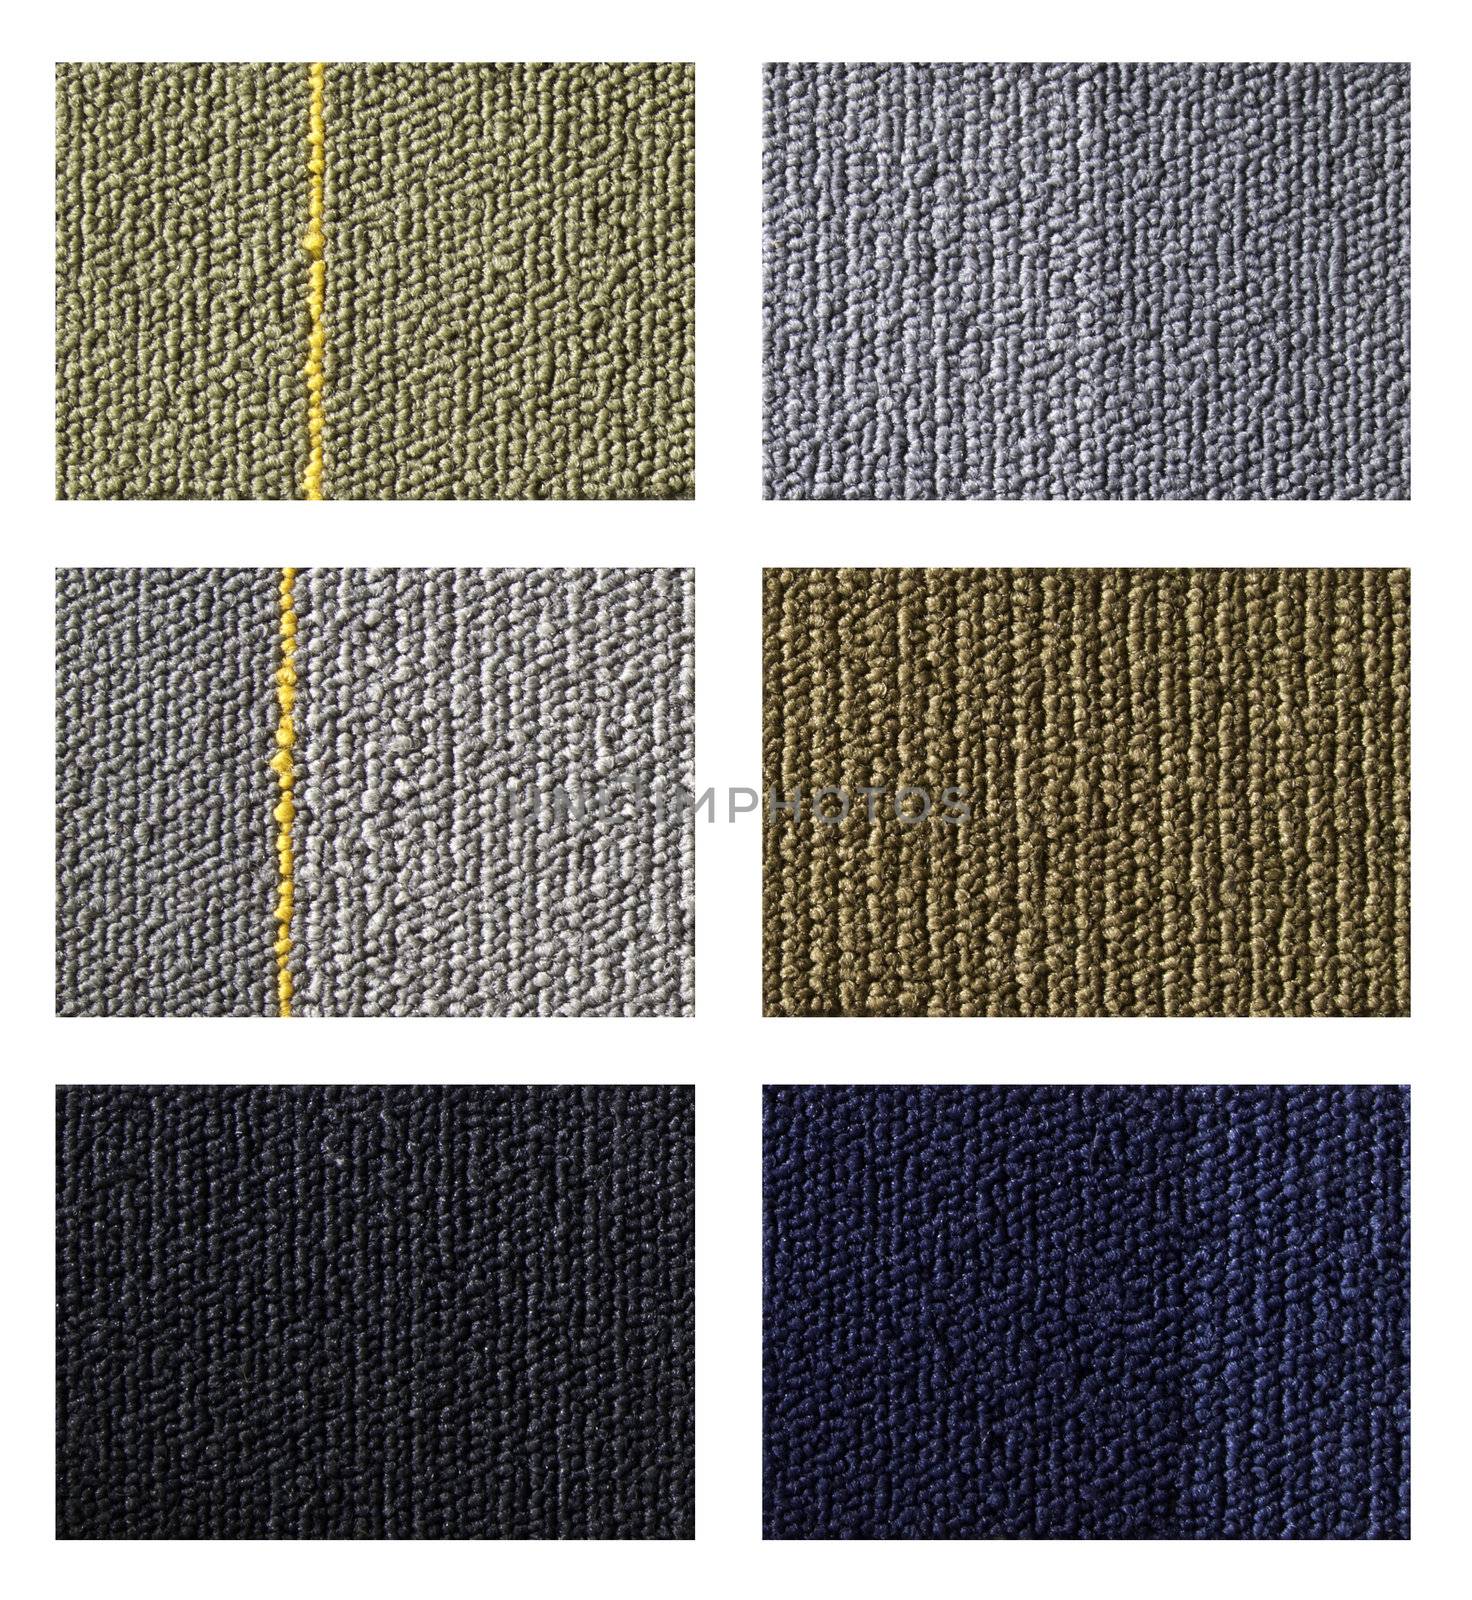 Samples of collection carpet on a white by siraanamwong